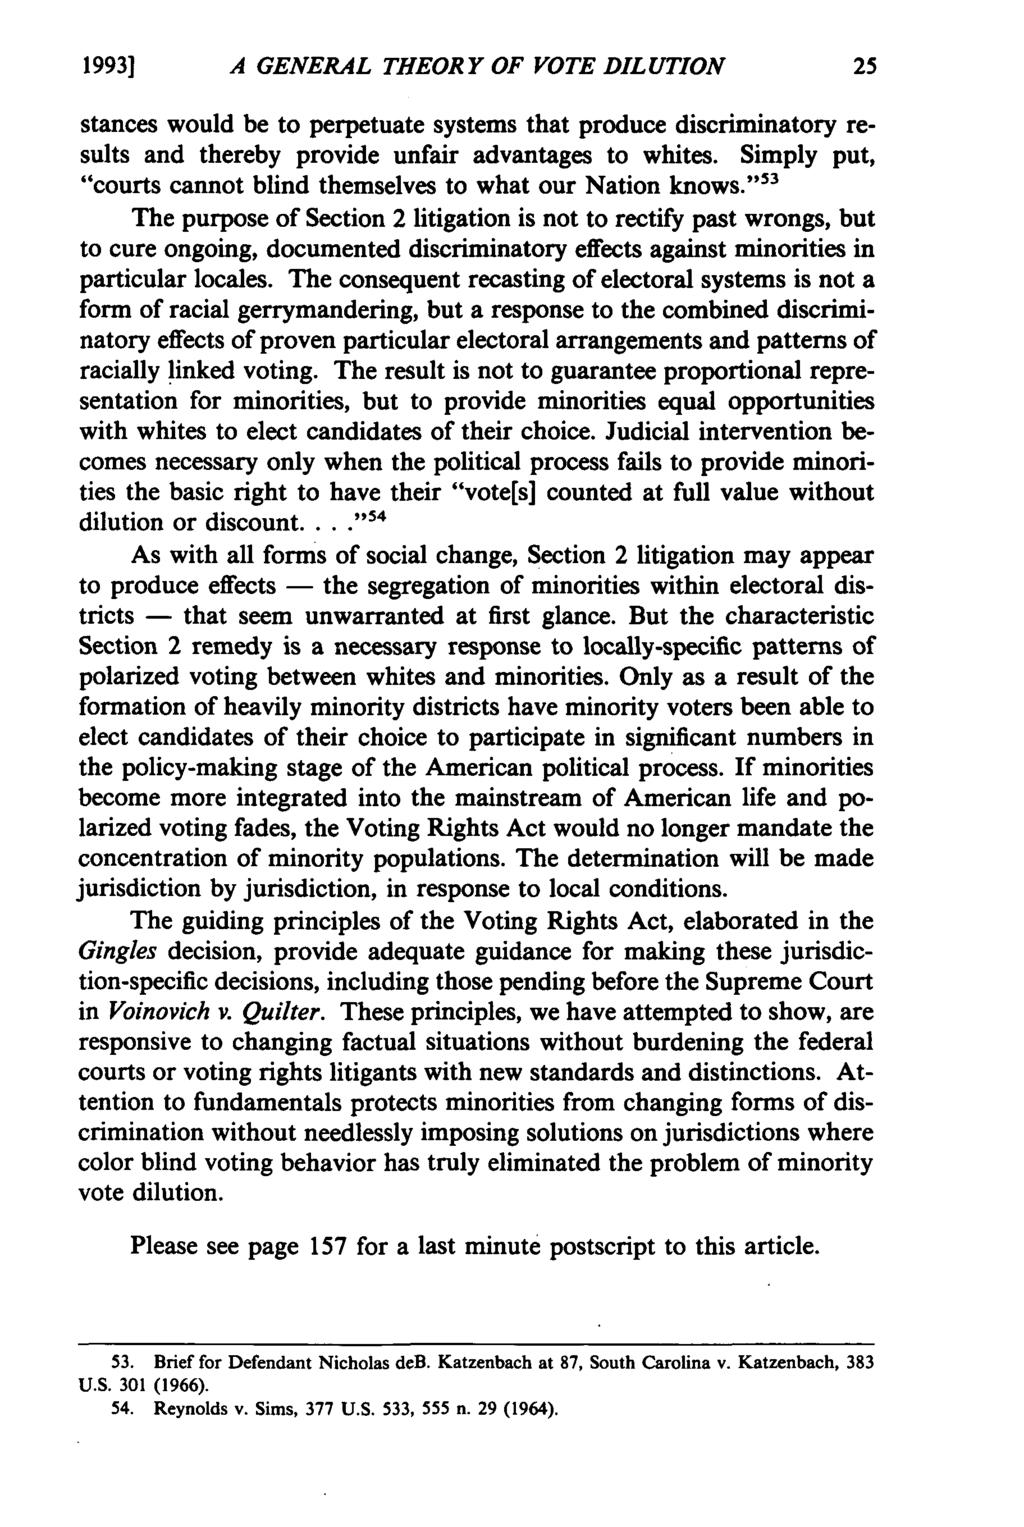 19931 A GENERAL THEORY OF VOTE DILUTION stances would be to perpetuate systems that produce discriminatory results and thereby provide unfair advantages to whites.